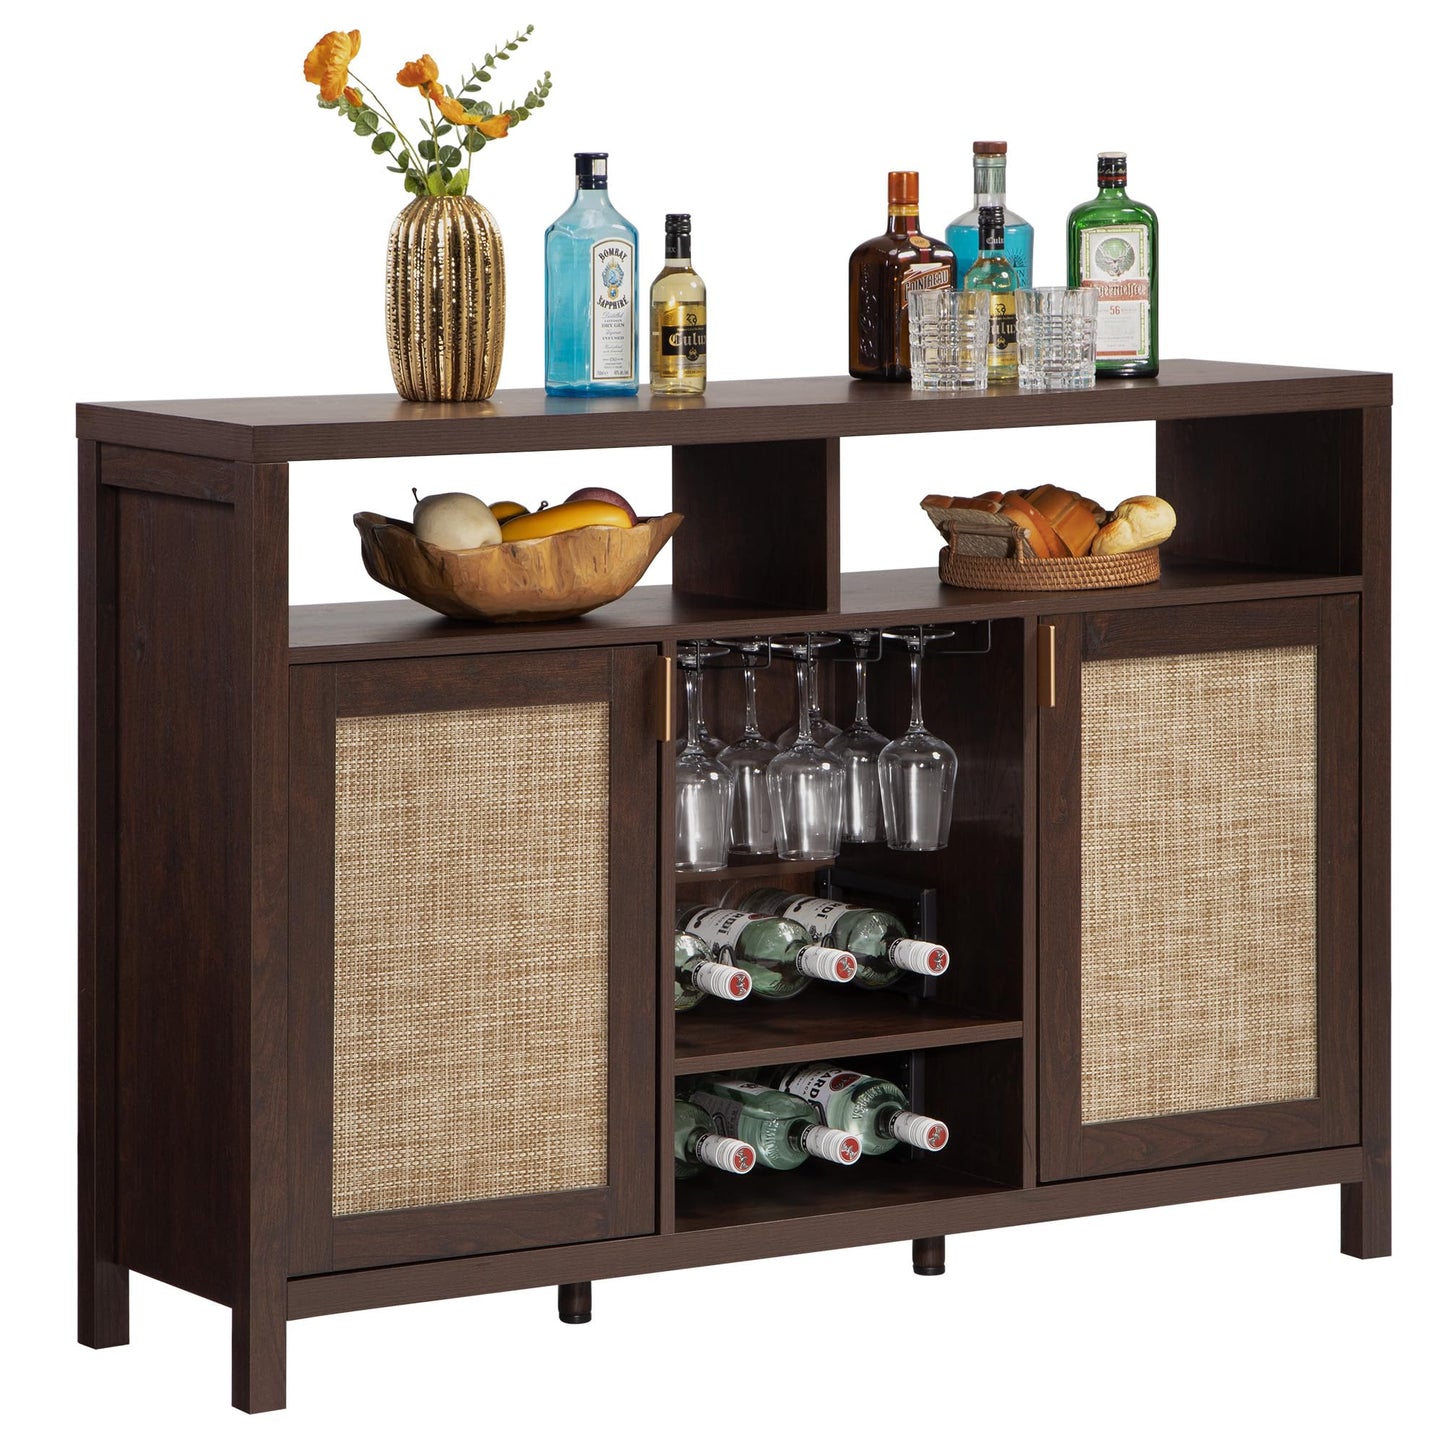 SICOTAS Rattan Coffee Bar Cabinet, 51" Sideboard Buffet Cabinet with Storage, Farmhouse Liquor Cabinet with Wine Racks Credenza Console Buffet Table